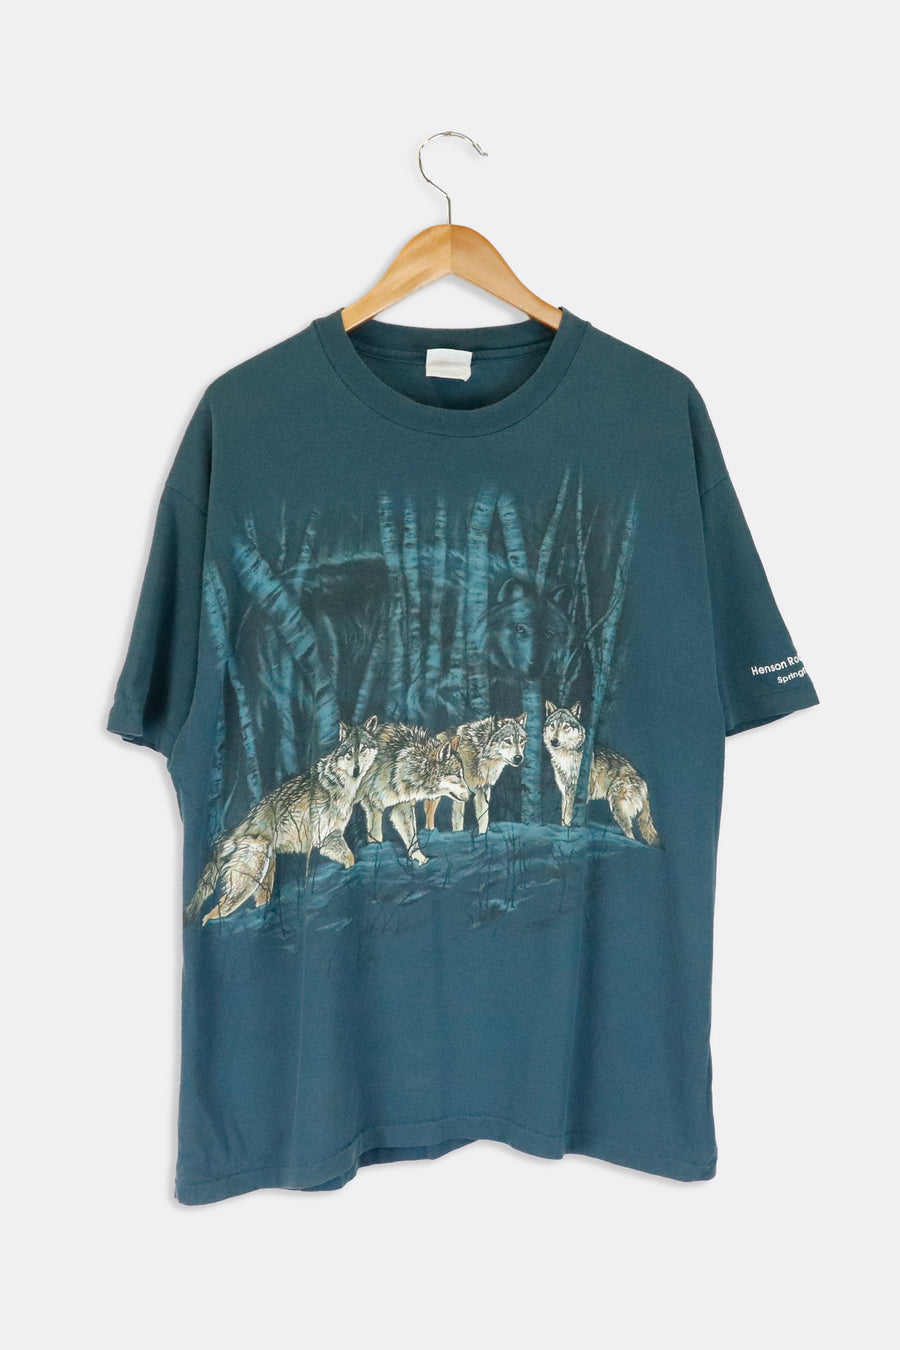 Vintage Wolves Gathering In The Woods Henson Robinson Zoo Graphic T Shirt Sz XL